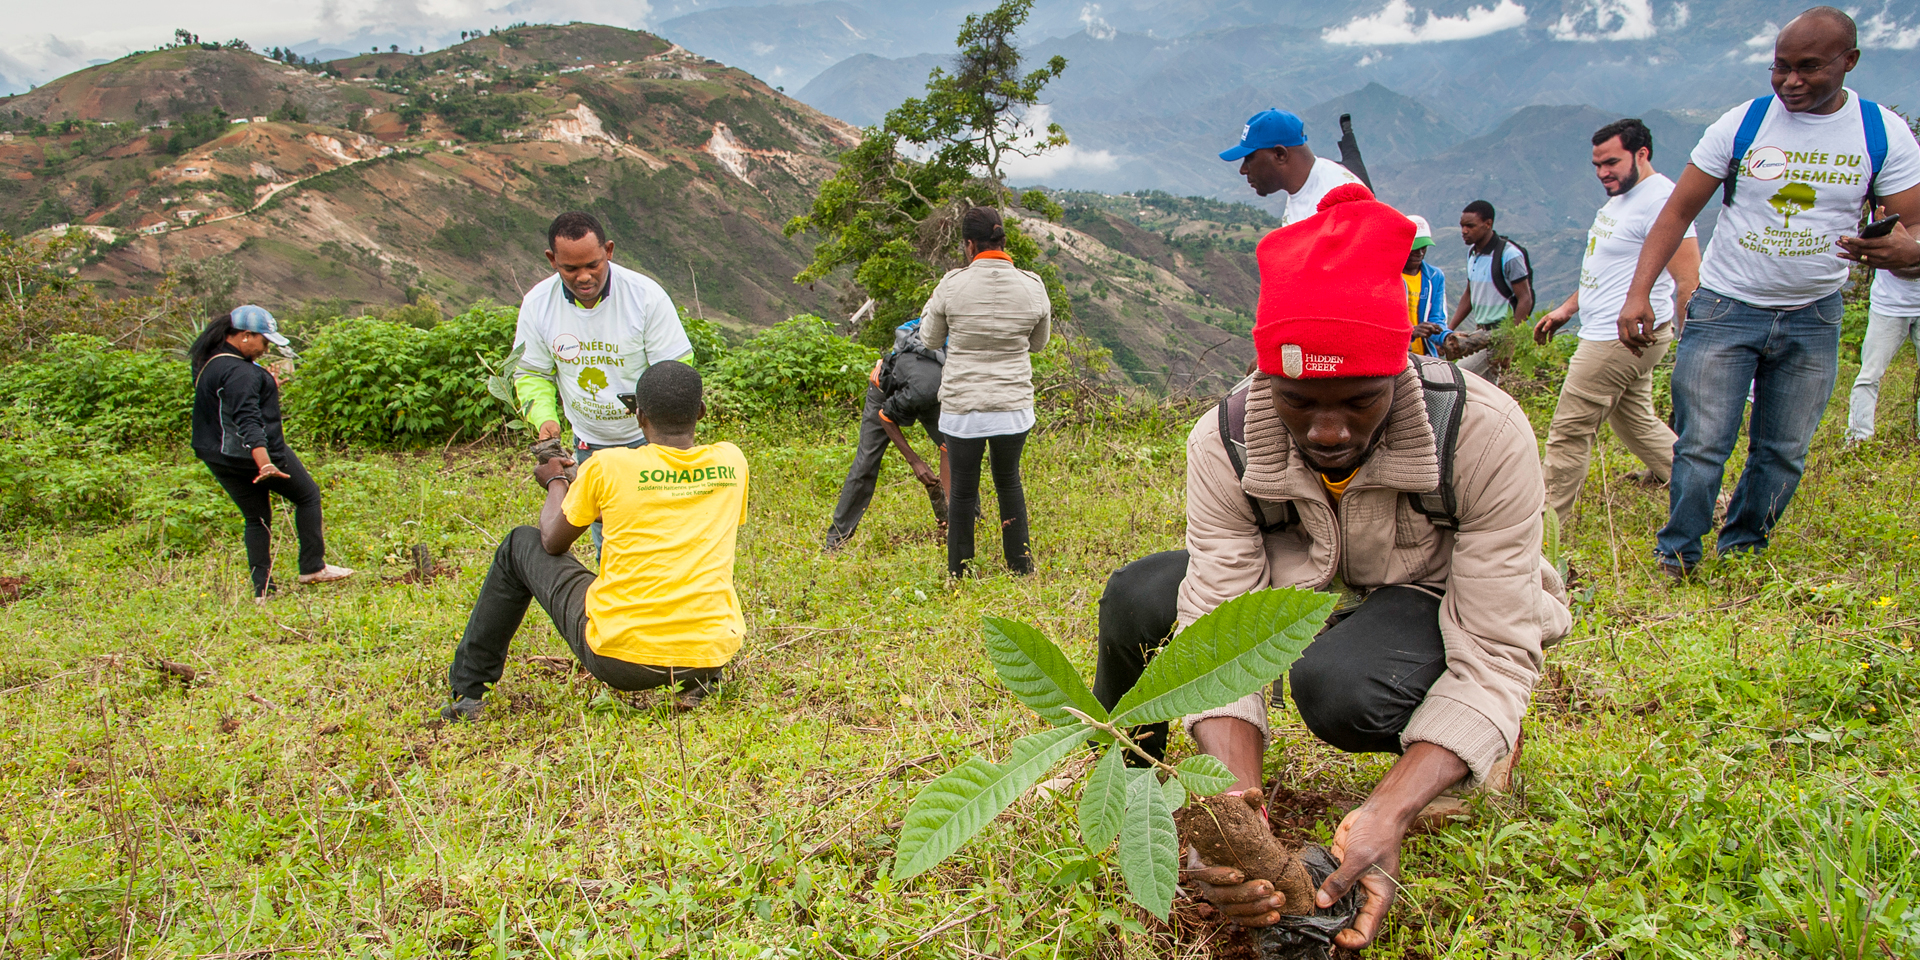 Several people planting trees in a bright green field with mountains in the distance.